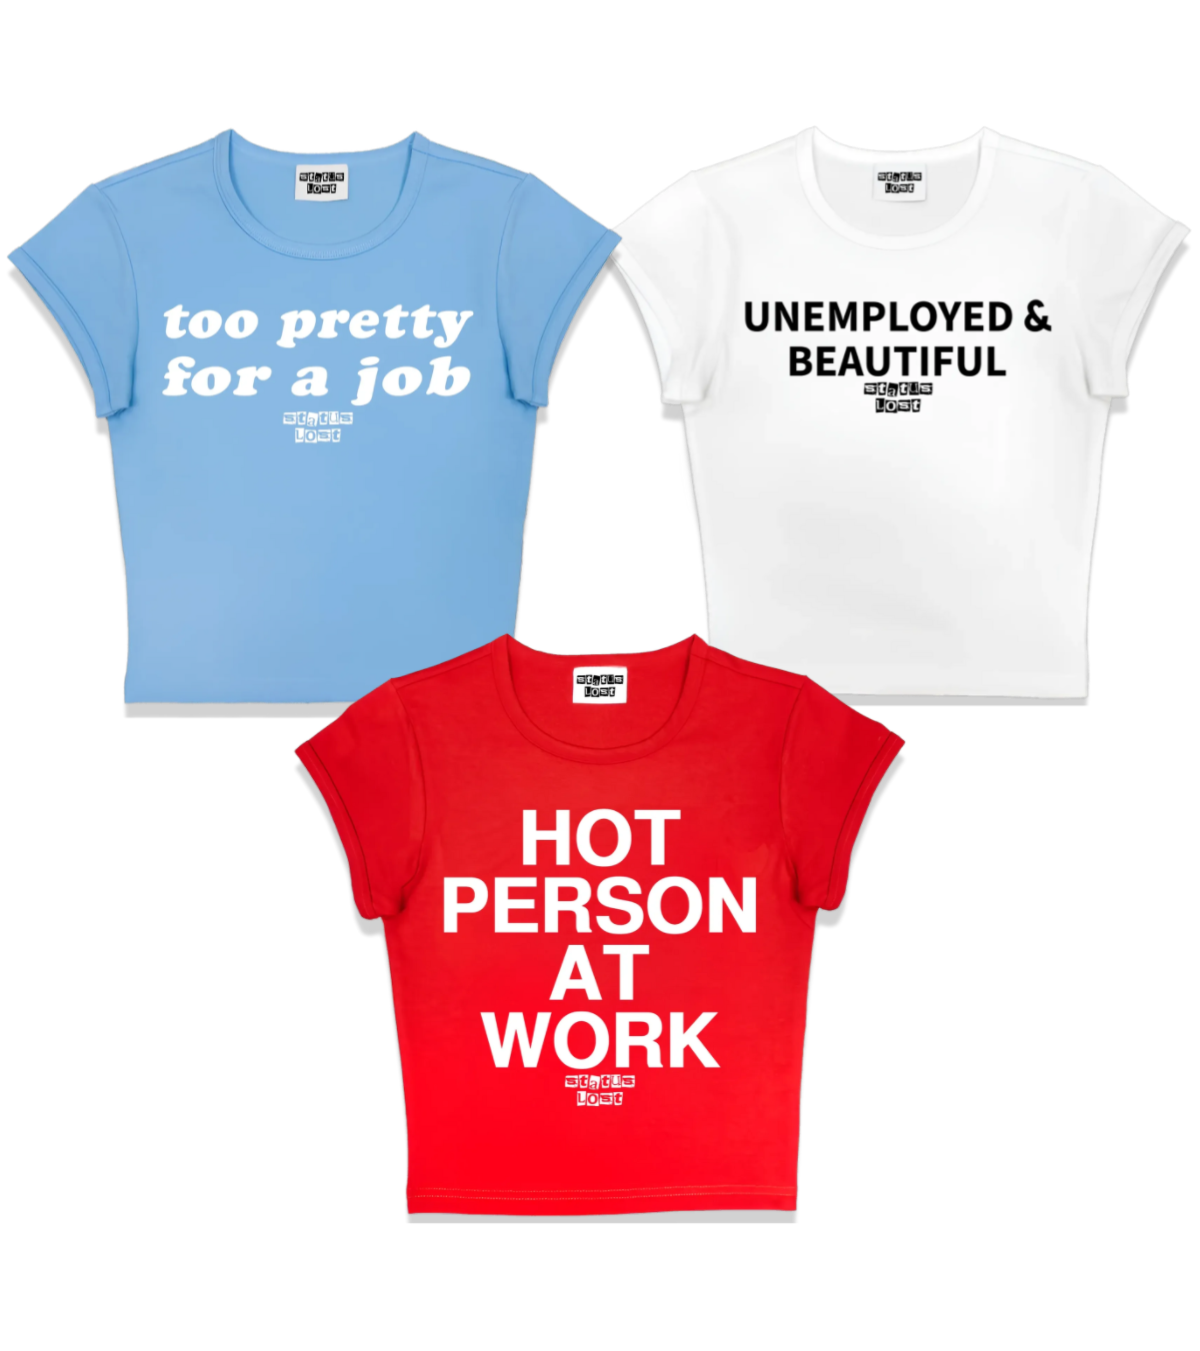 “Too pretty for a job” + “Unemployed & beautiful” + “Hot person at work” Trio